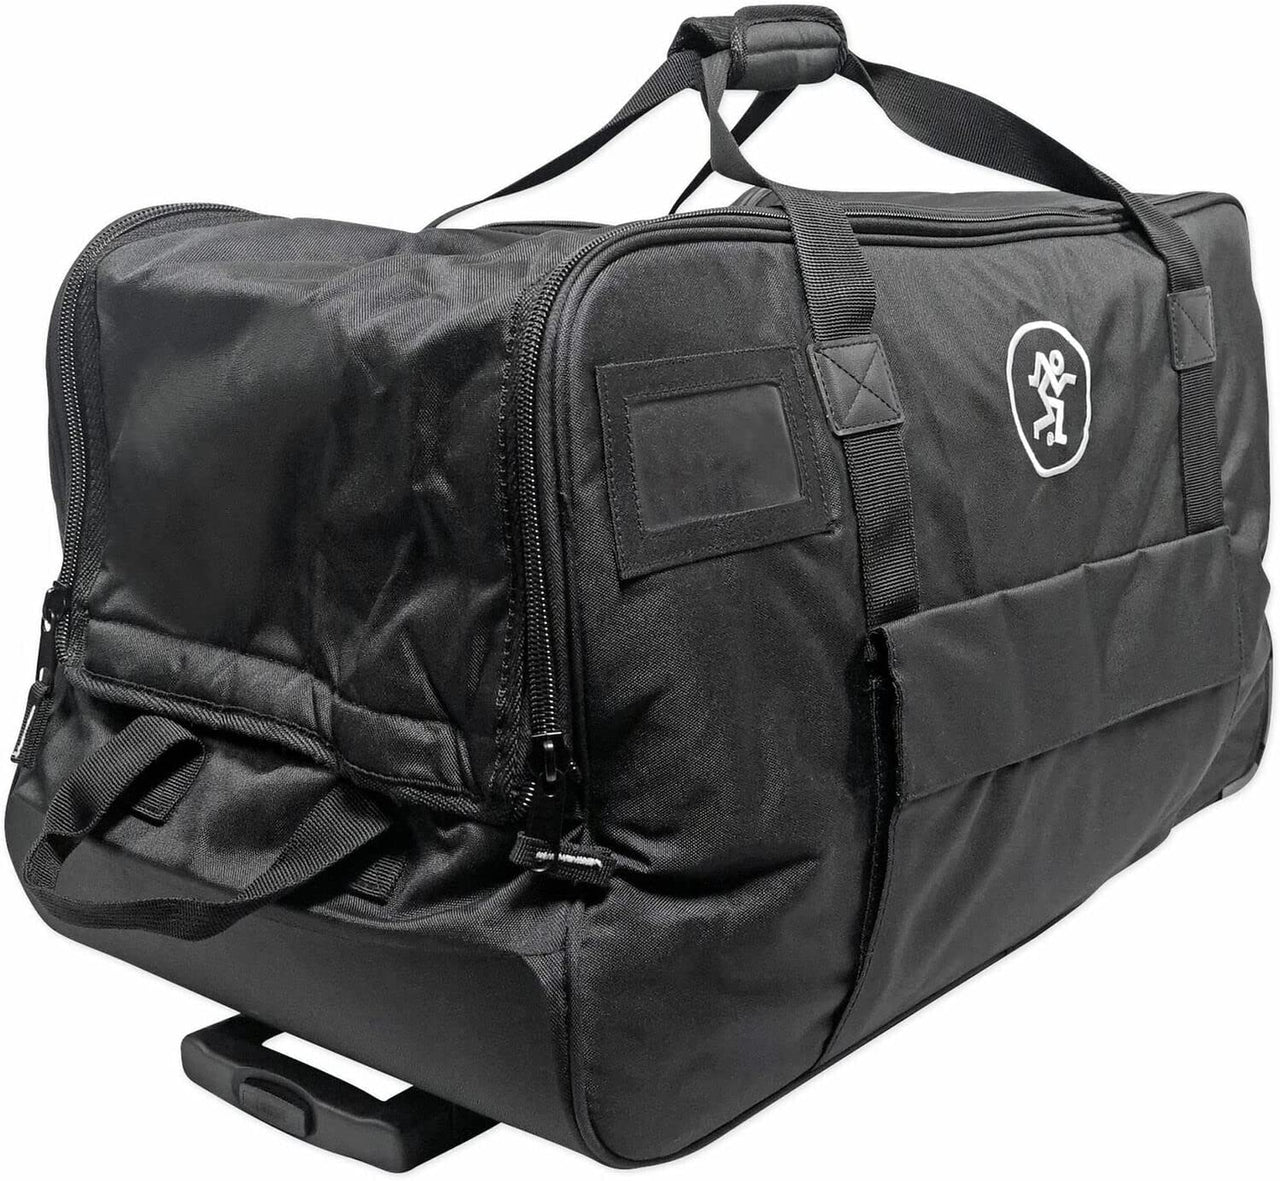 Mackie Thump 15A / 15BST - Rolling Speaker Bag with Wheels and Integrated Handle